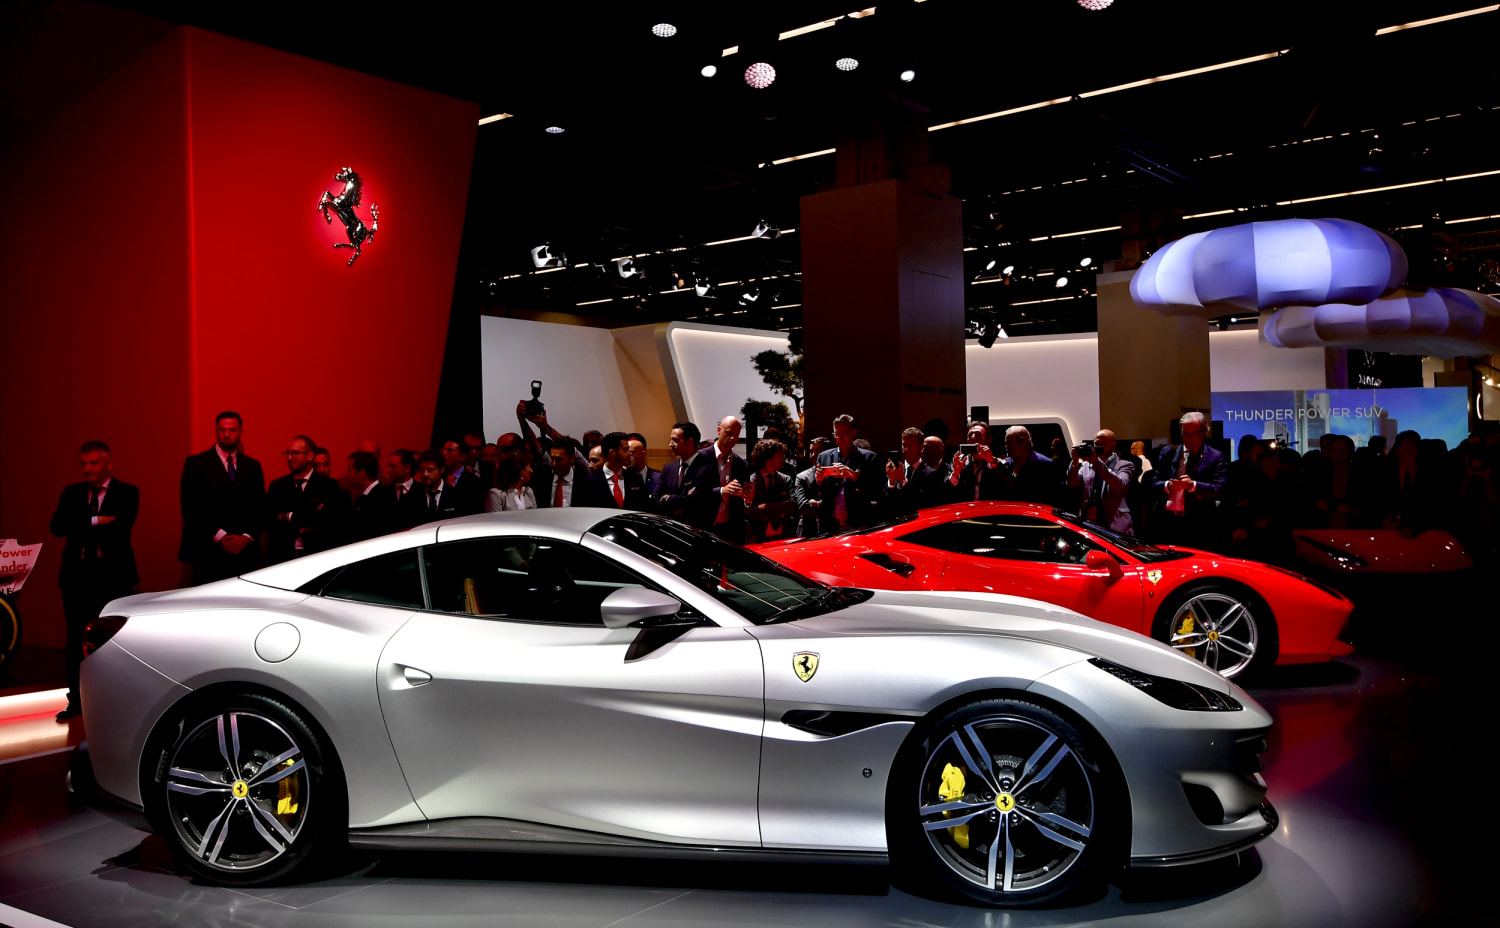 10 Of The Most Powerful Expensive Exotic New Cars At The Frankfurt Motor Show